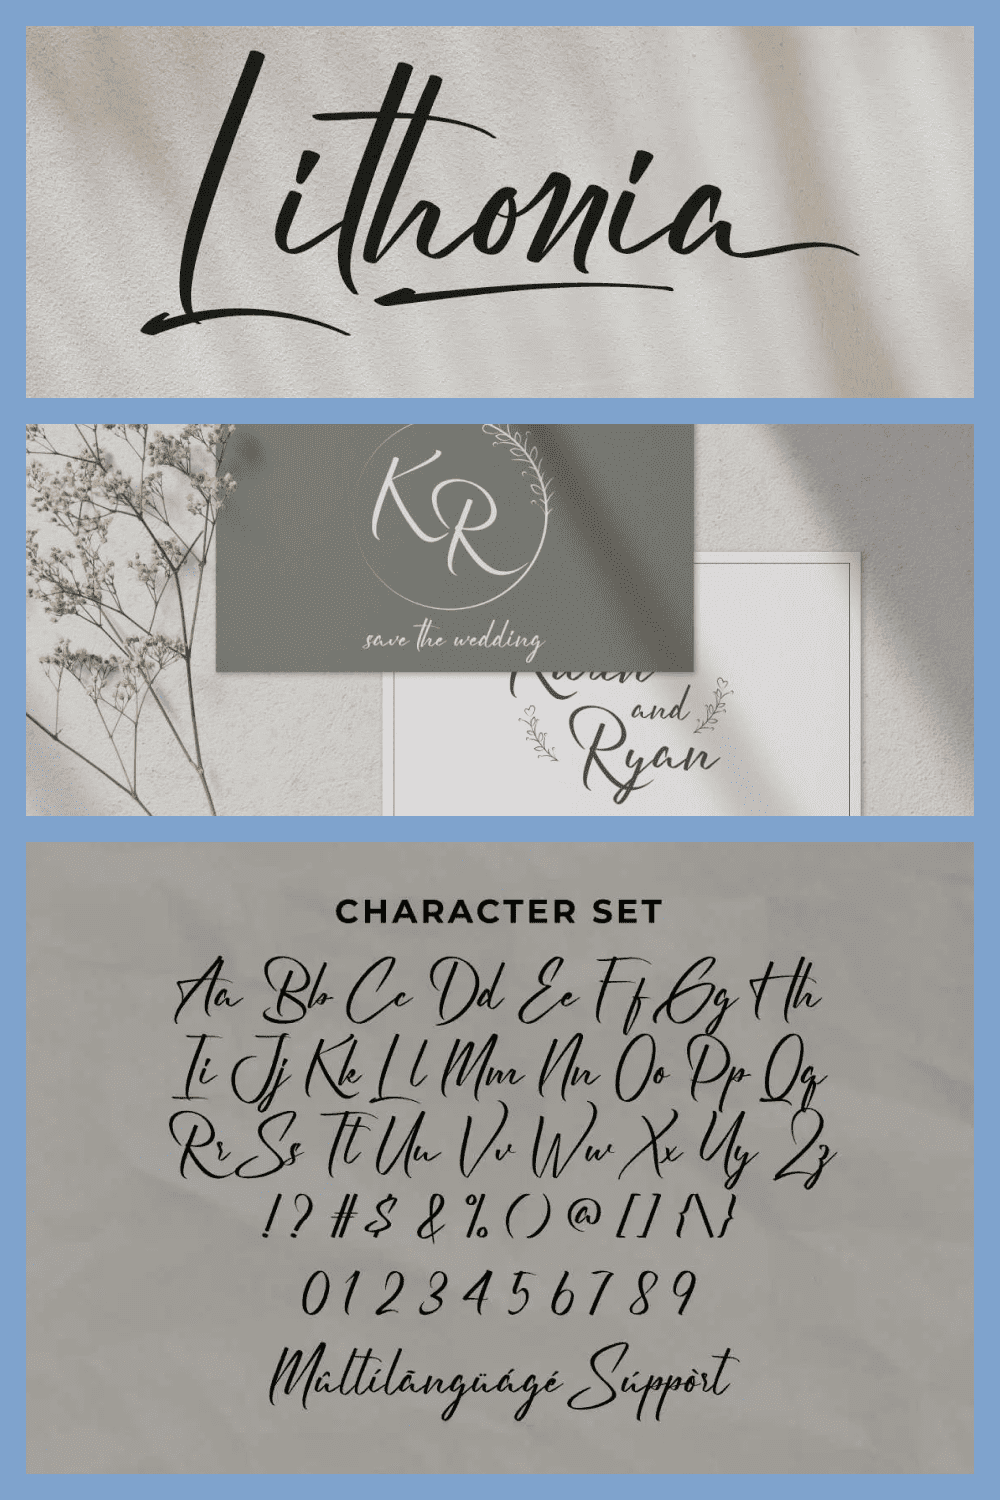 The font looks realistic handwritten looks, giving realistic hand-lettered font style.